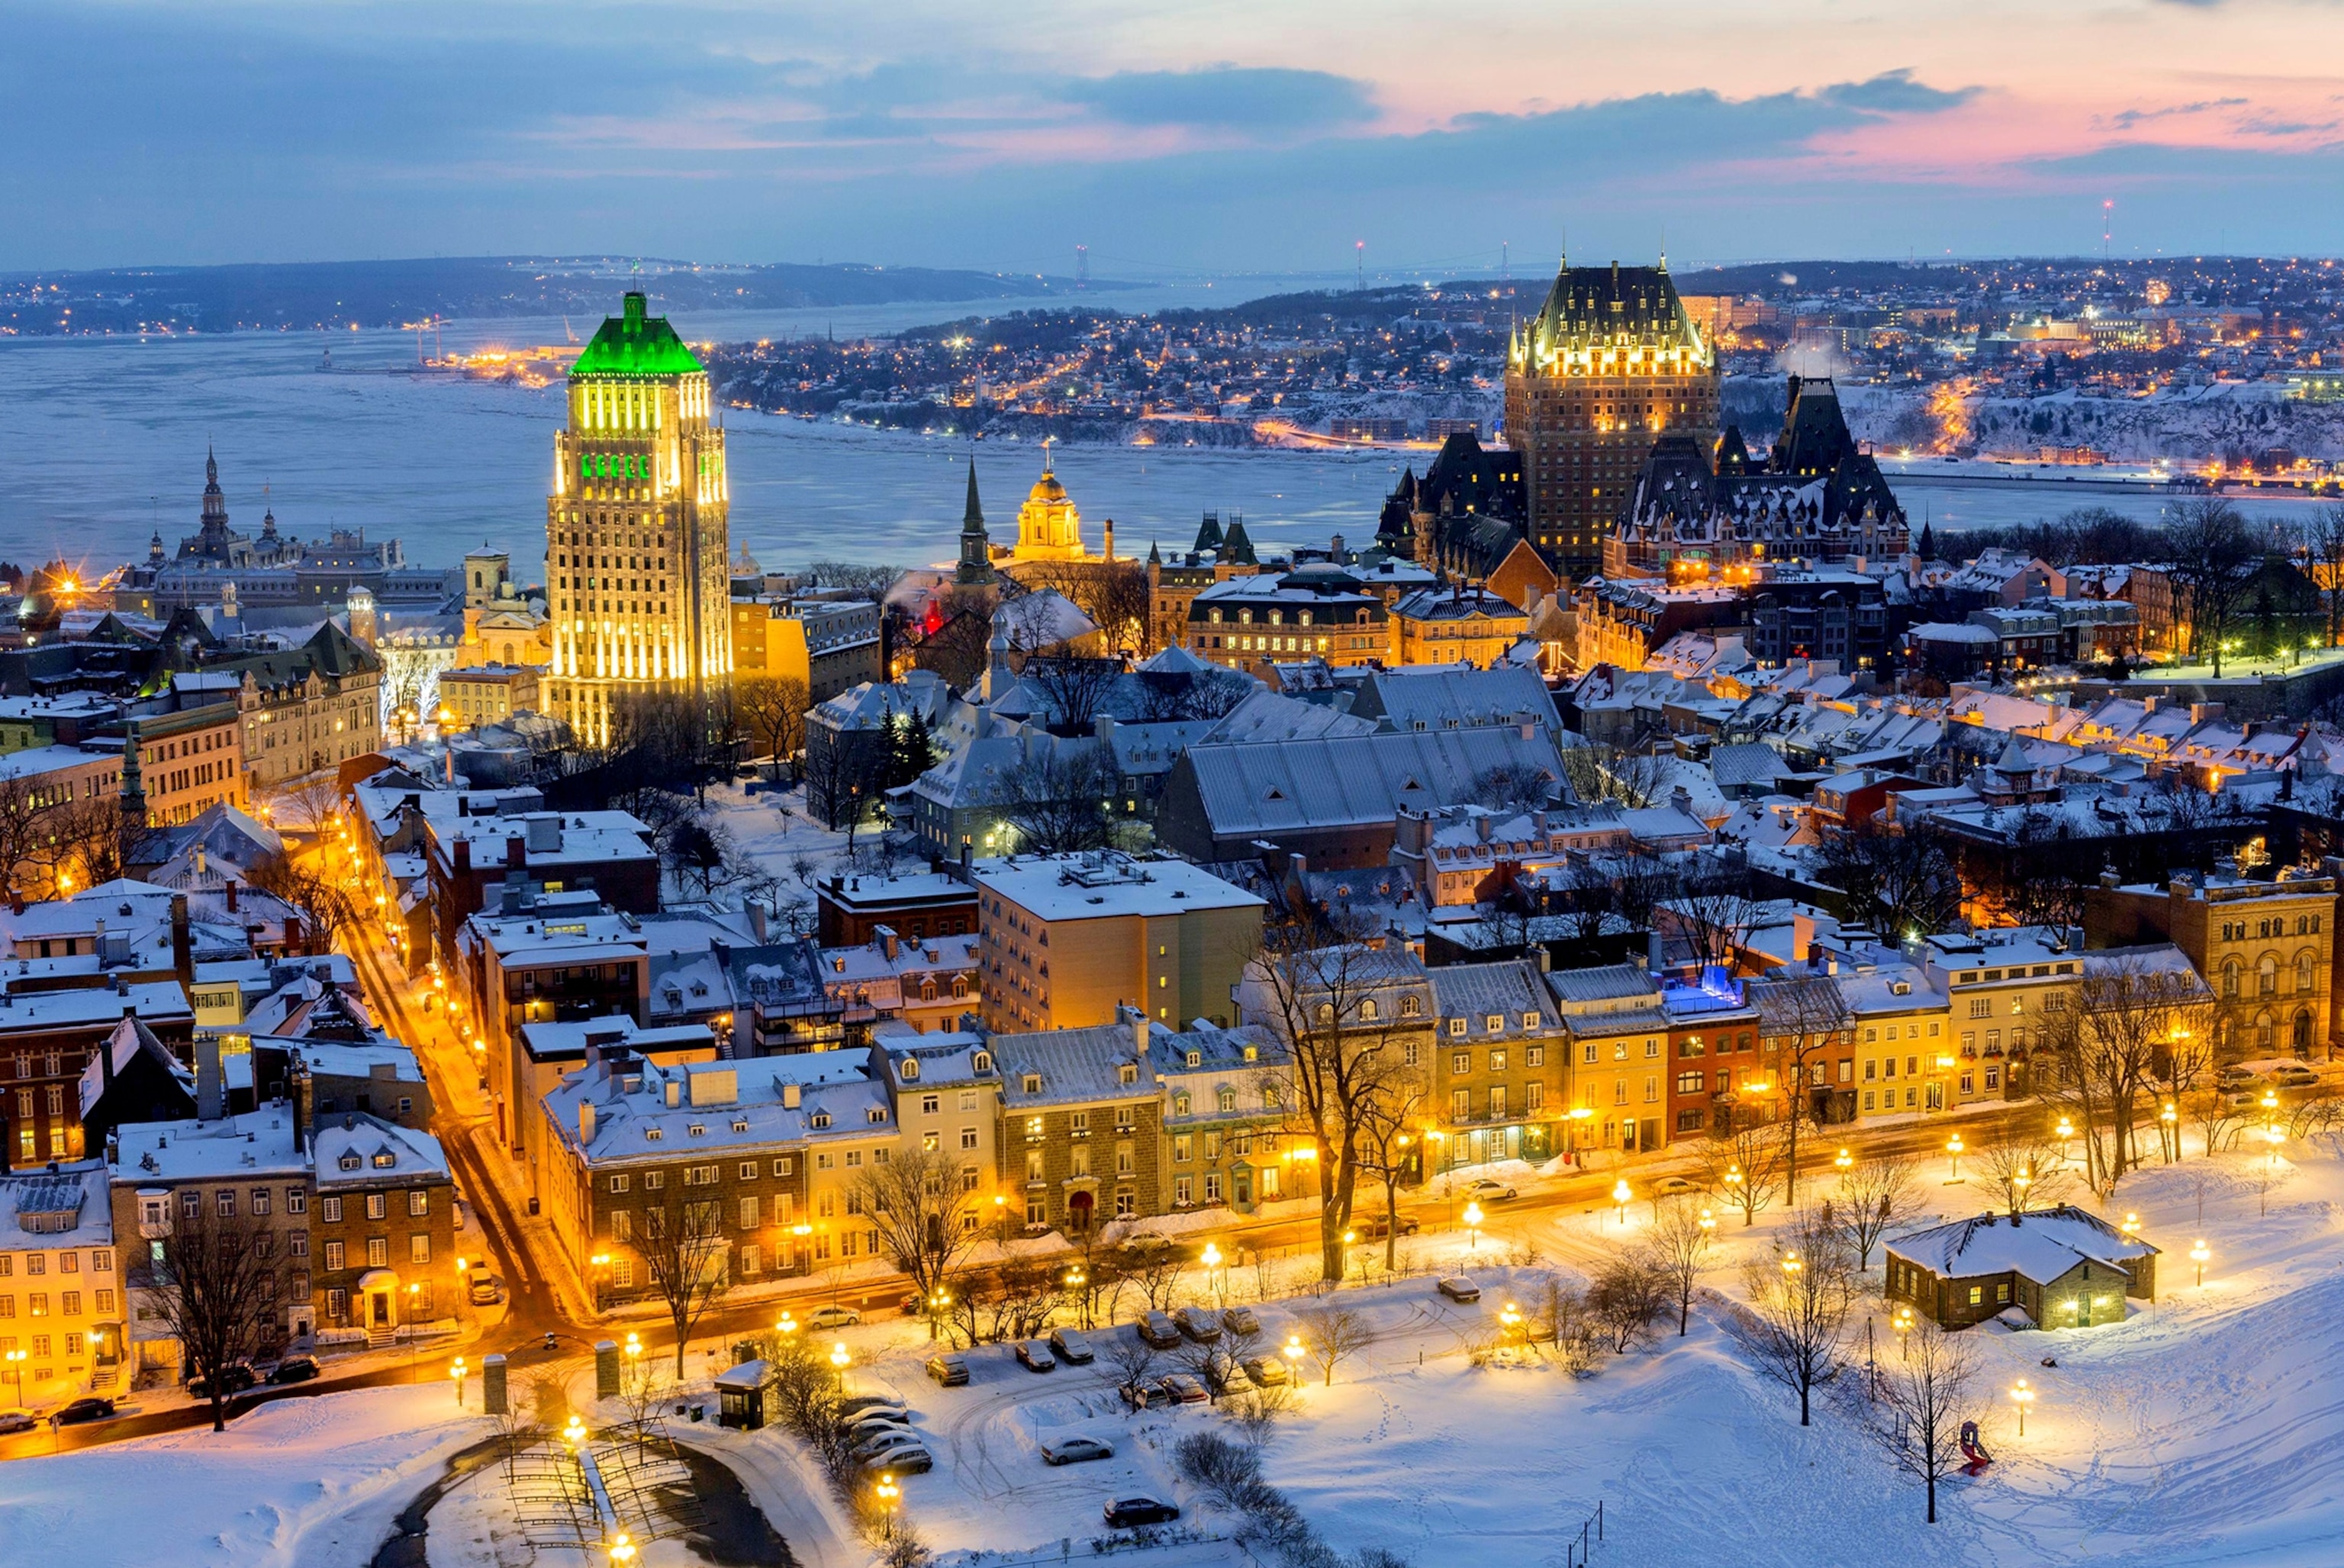 upper-town-winter-old-quebec-city-canada.jpg